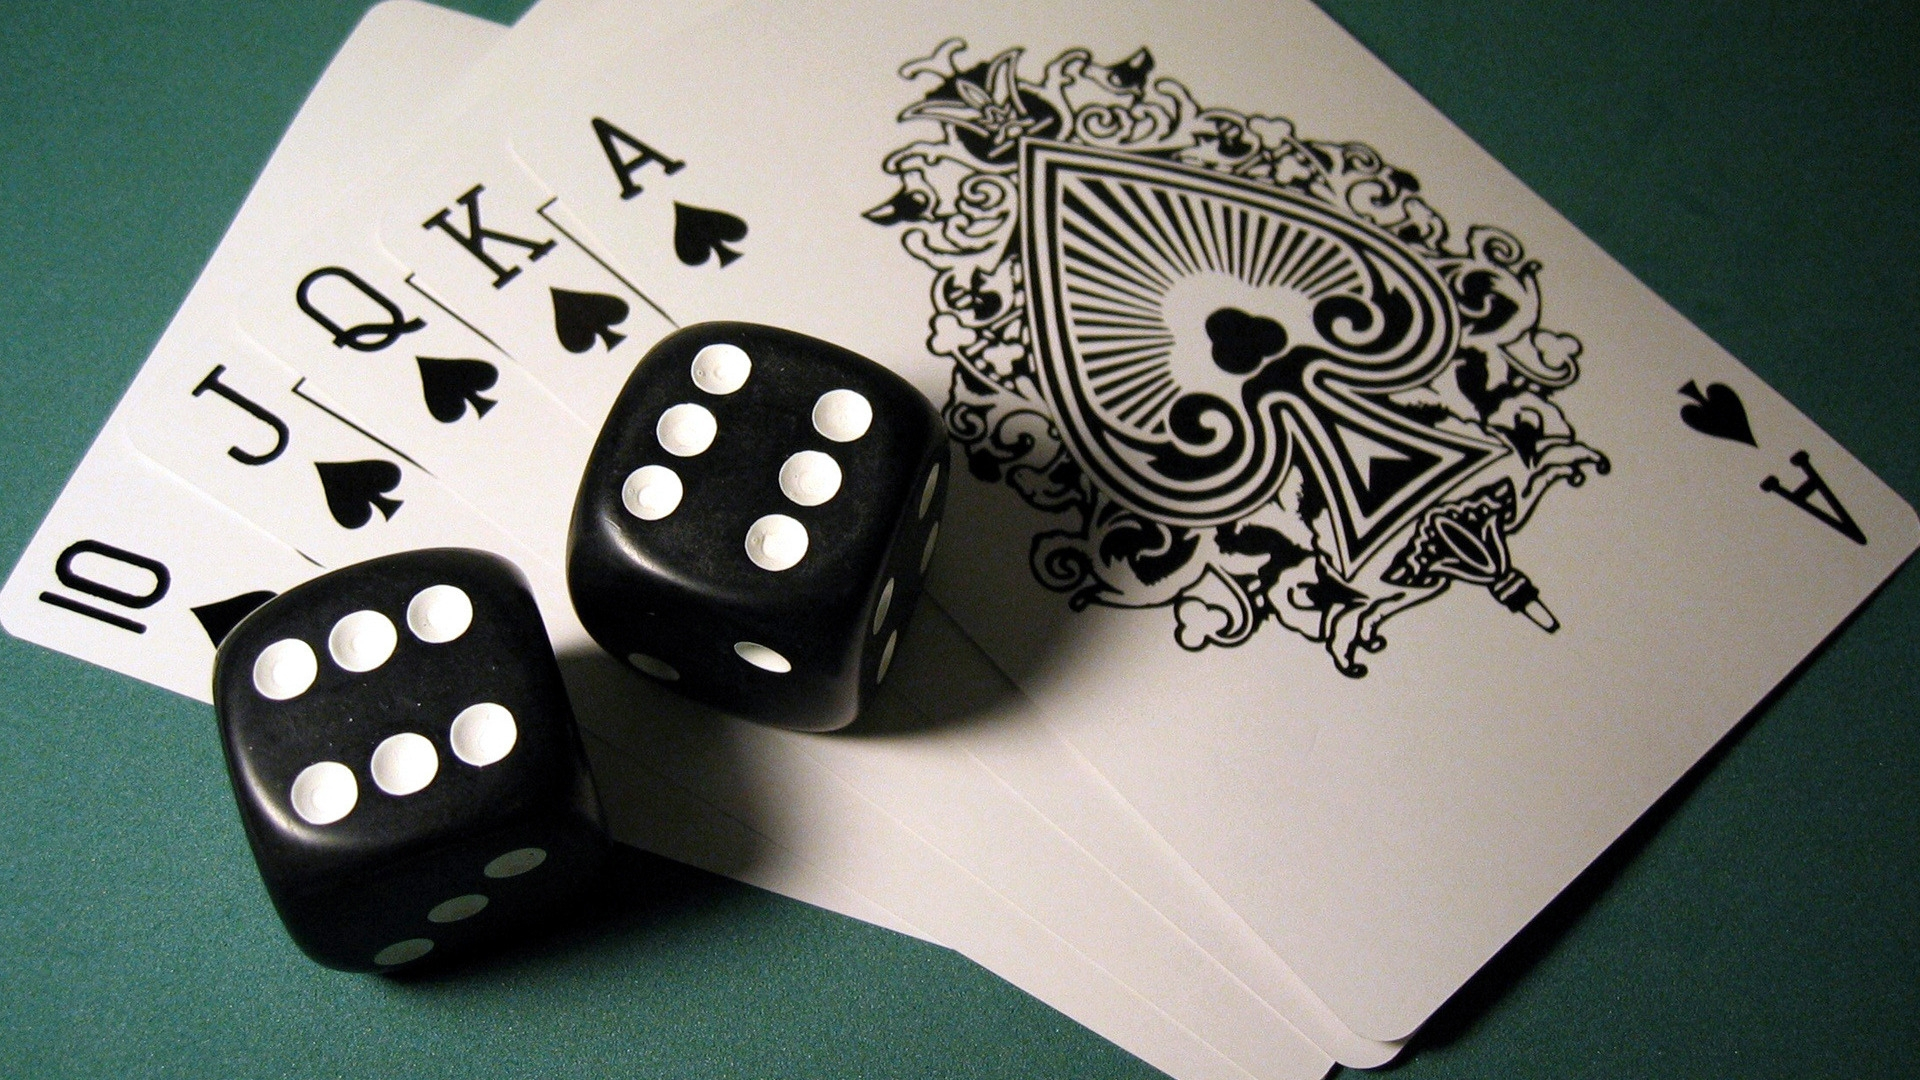 1920x1080 Wallpaper : cubes, cards, poker, combination wallhaven 749691 HD Wallpapers